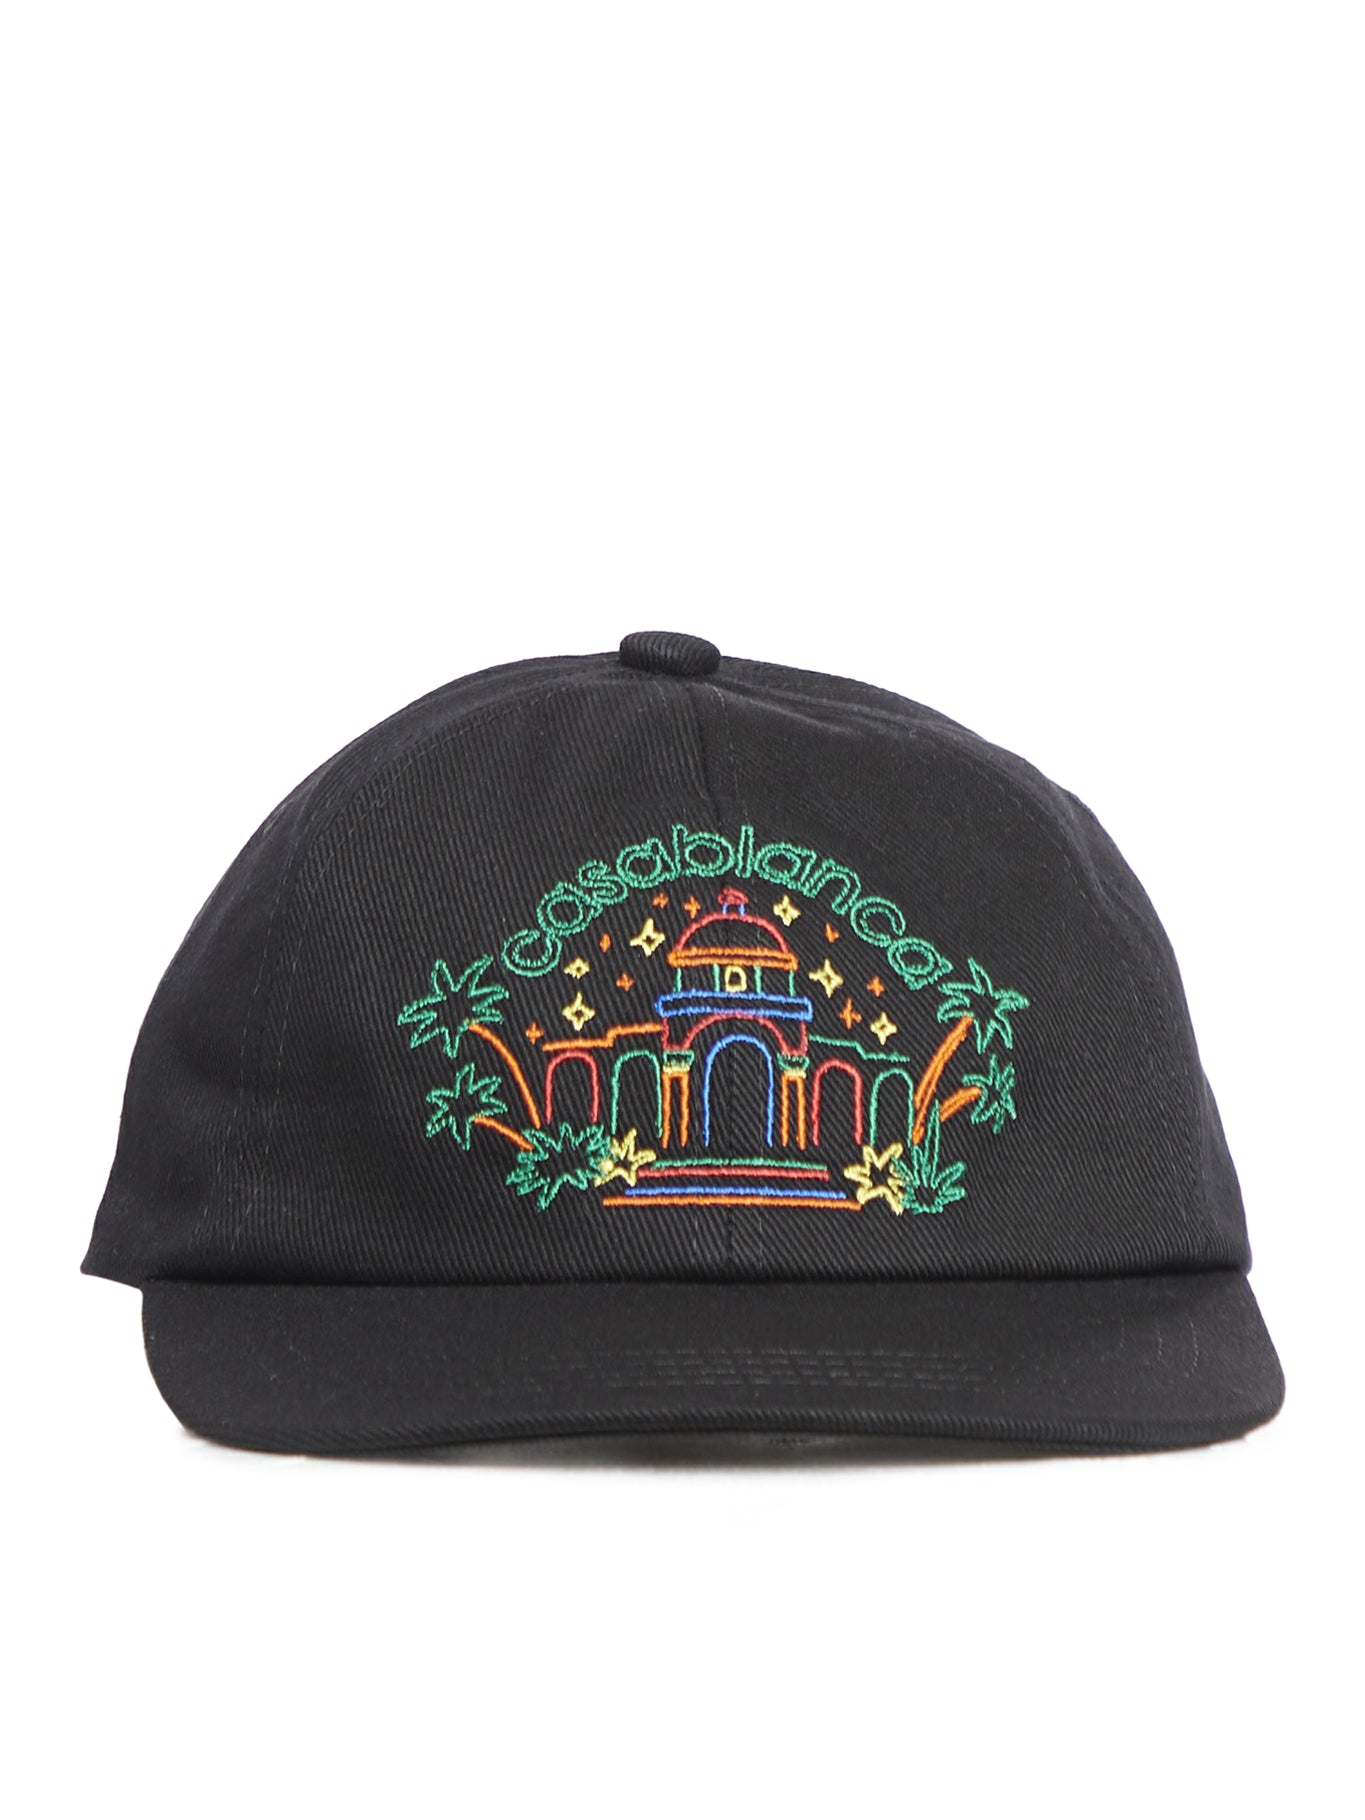 RAINBOW CRAYON TEMPLE EMBROIDERED CAP